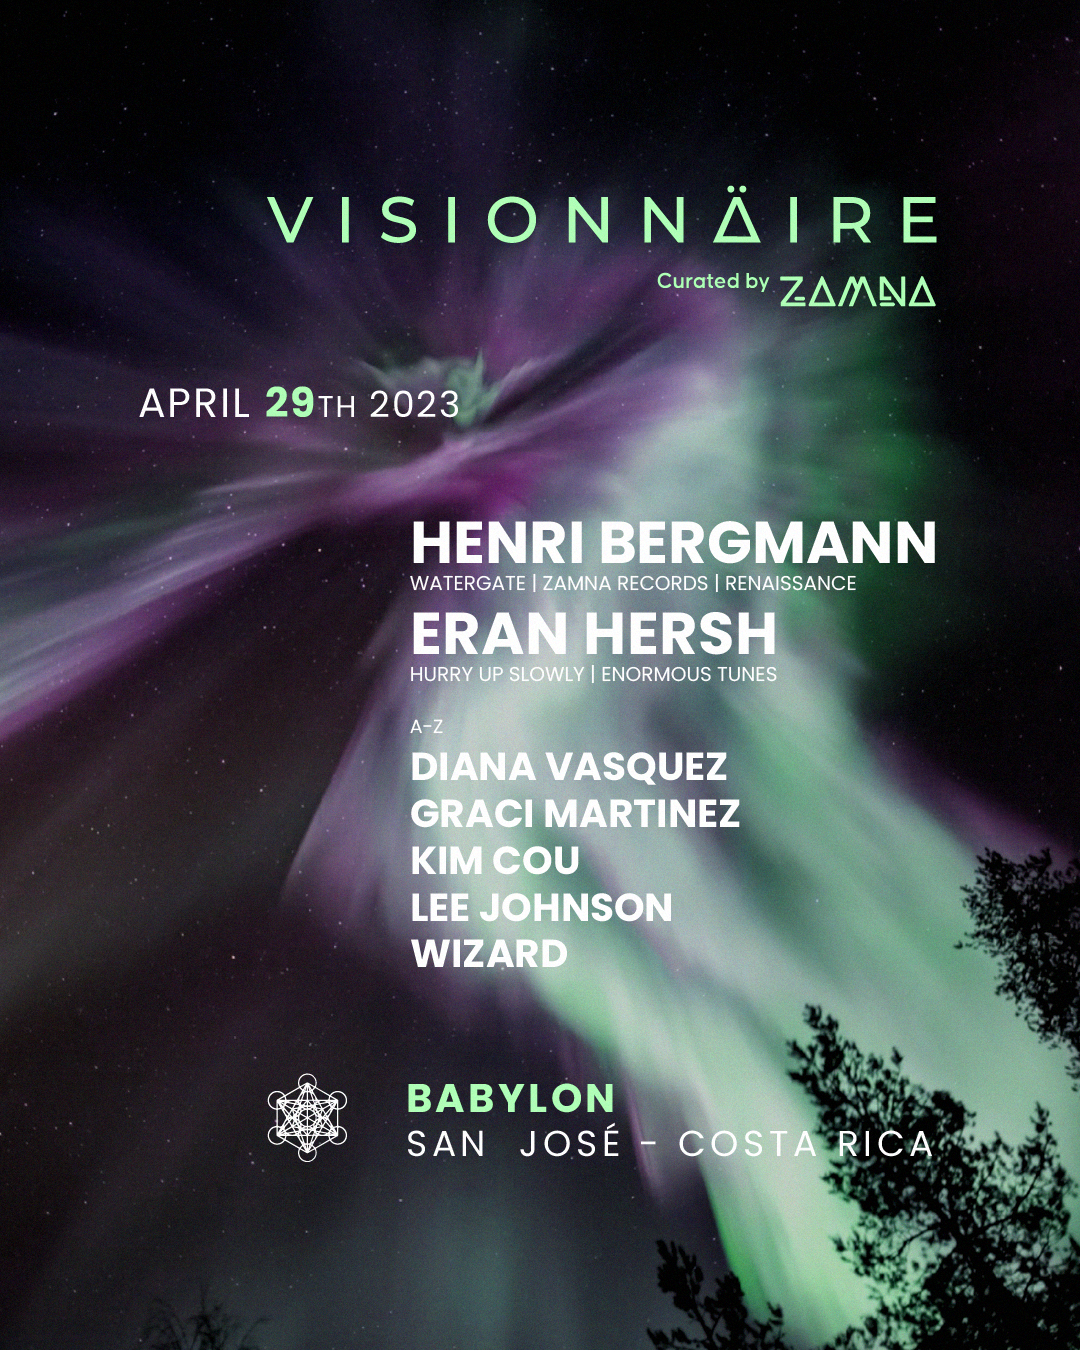 VISIONNAIRE Curated by ZAMNA @ Babylon